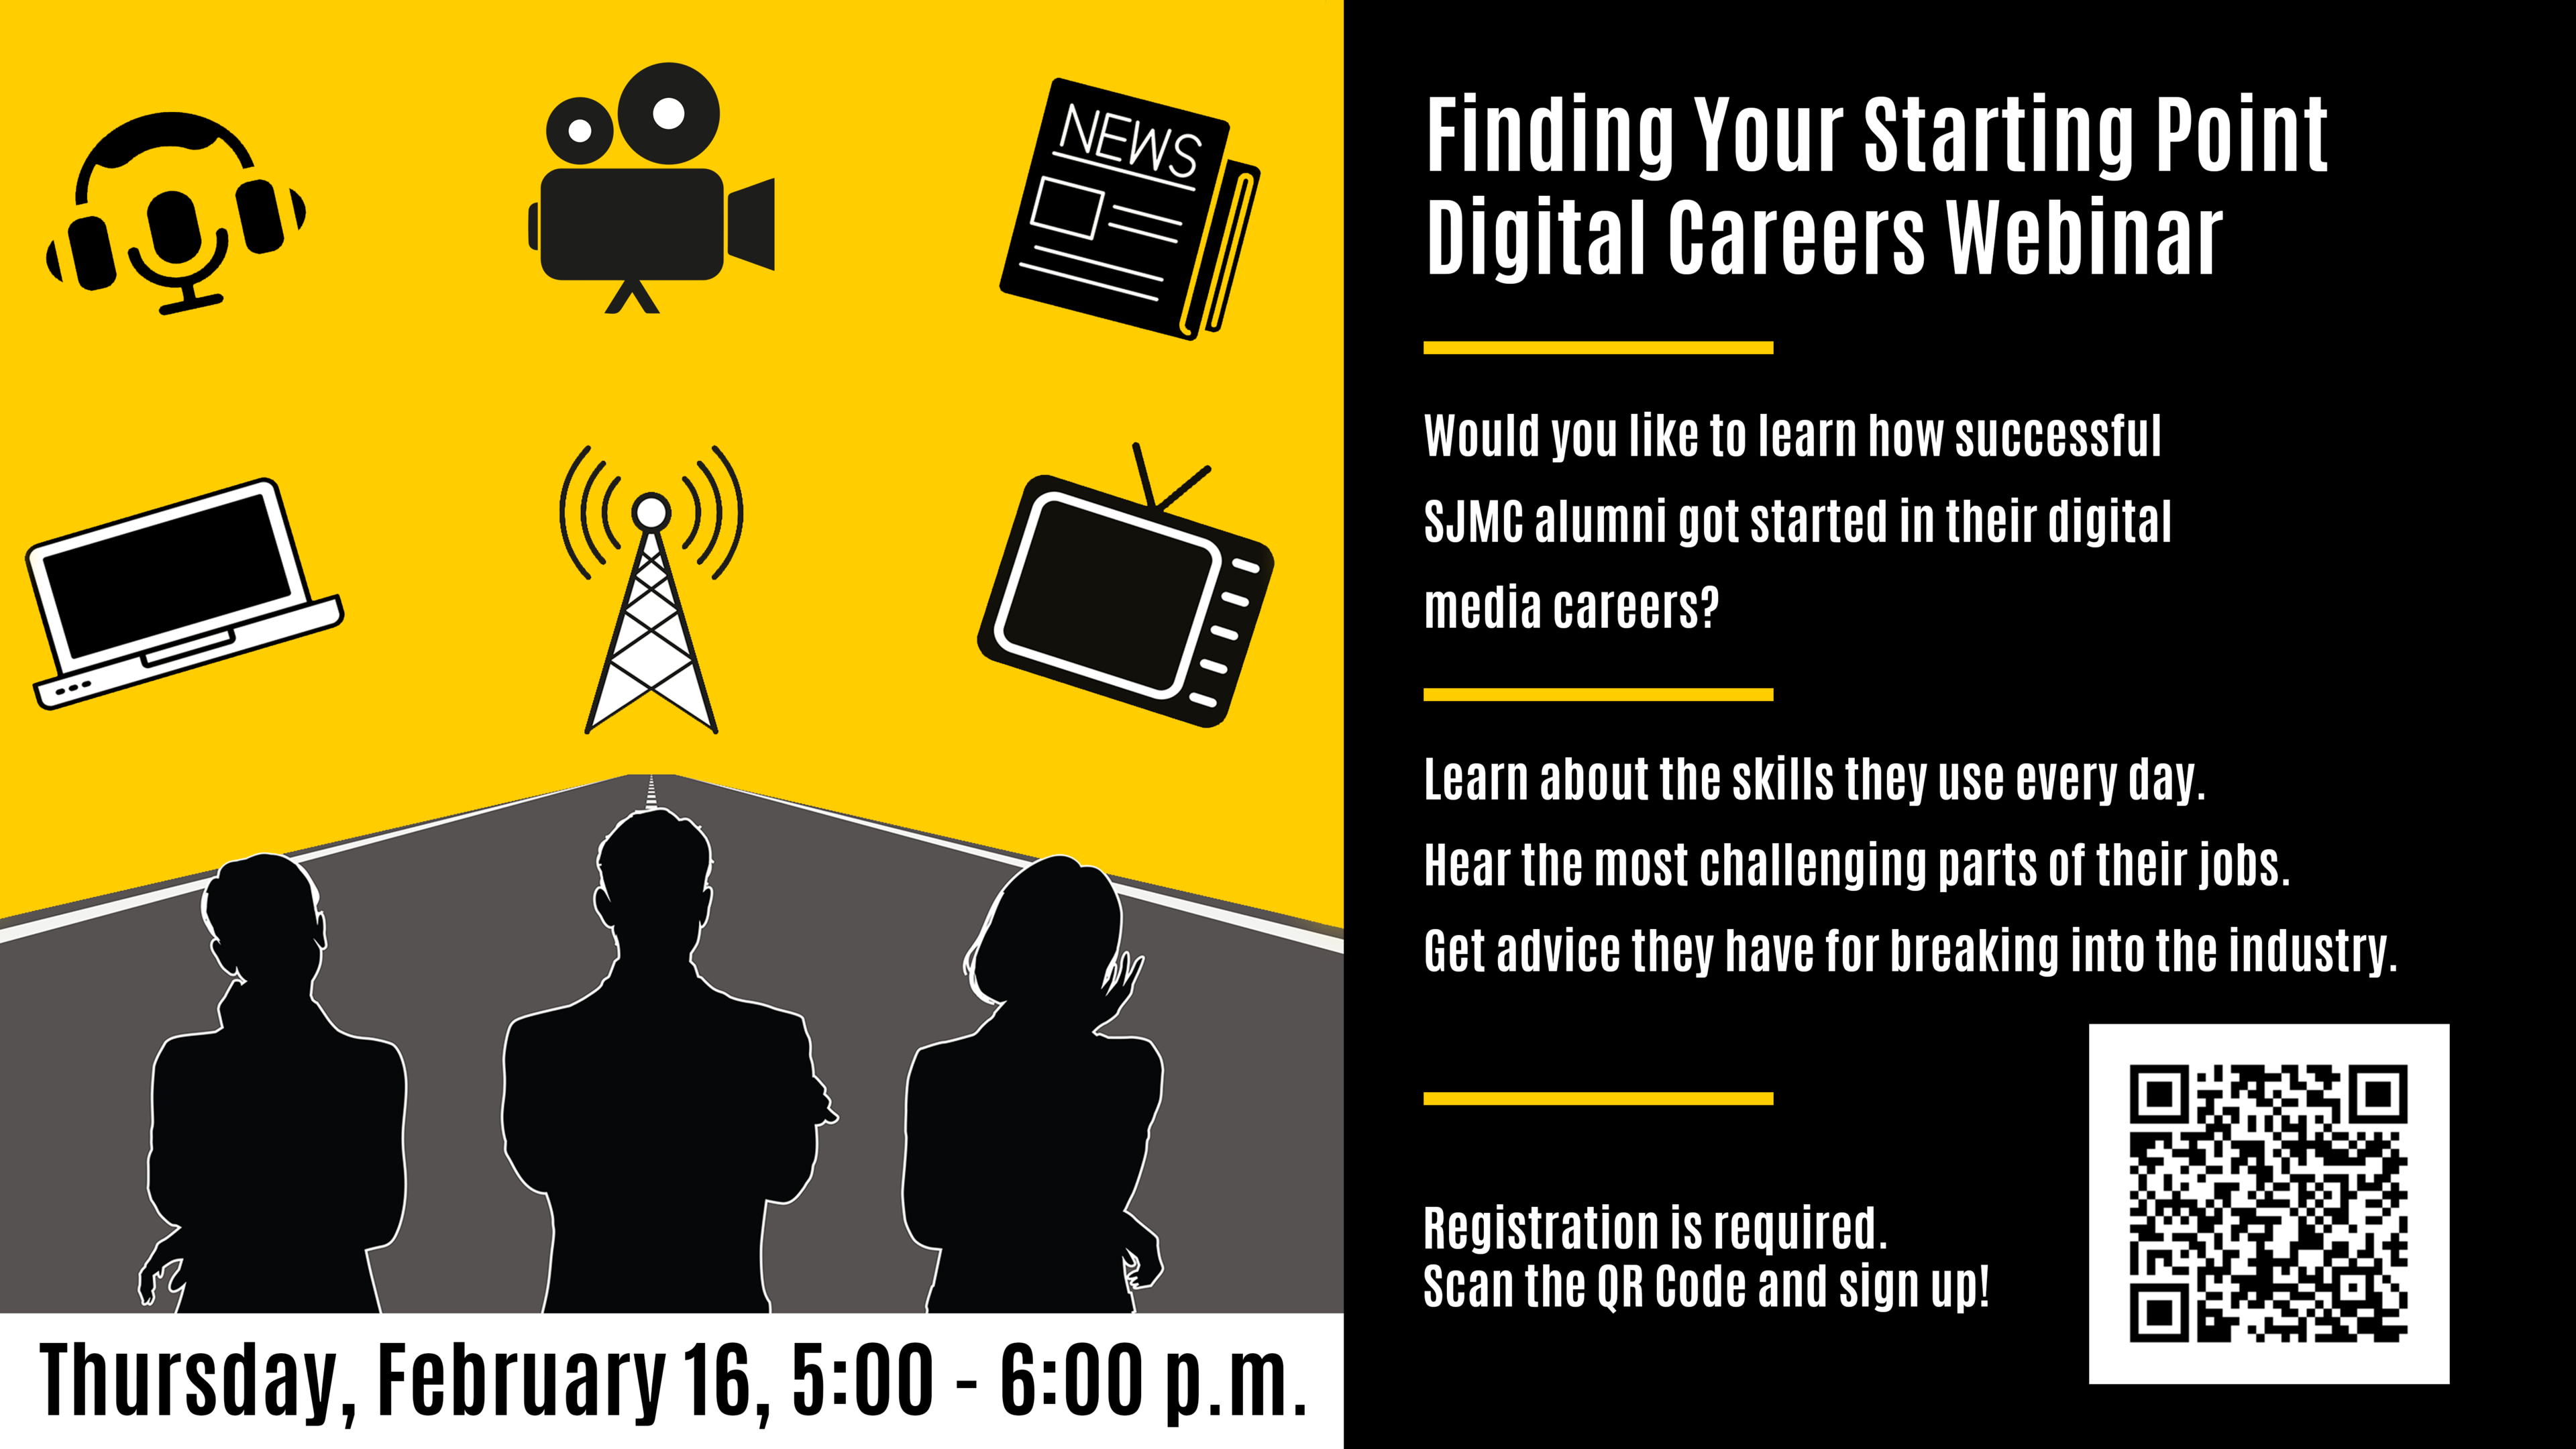 Finding Your Starting Point Digital Careers Webinar